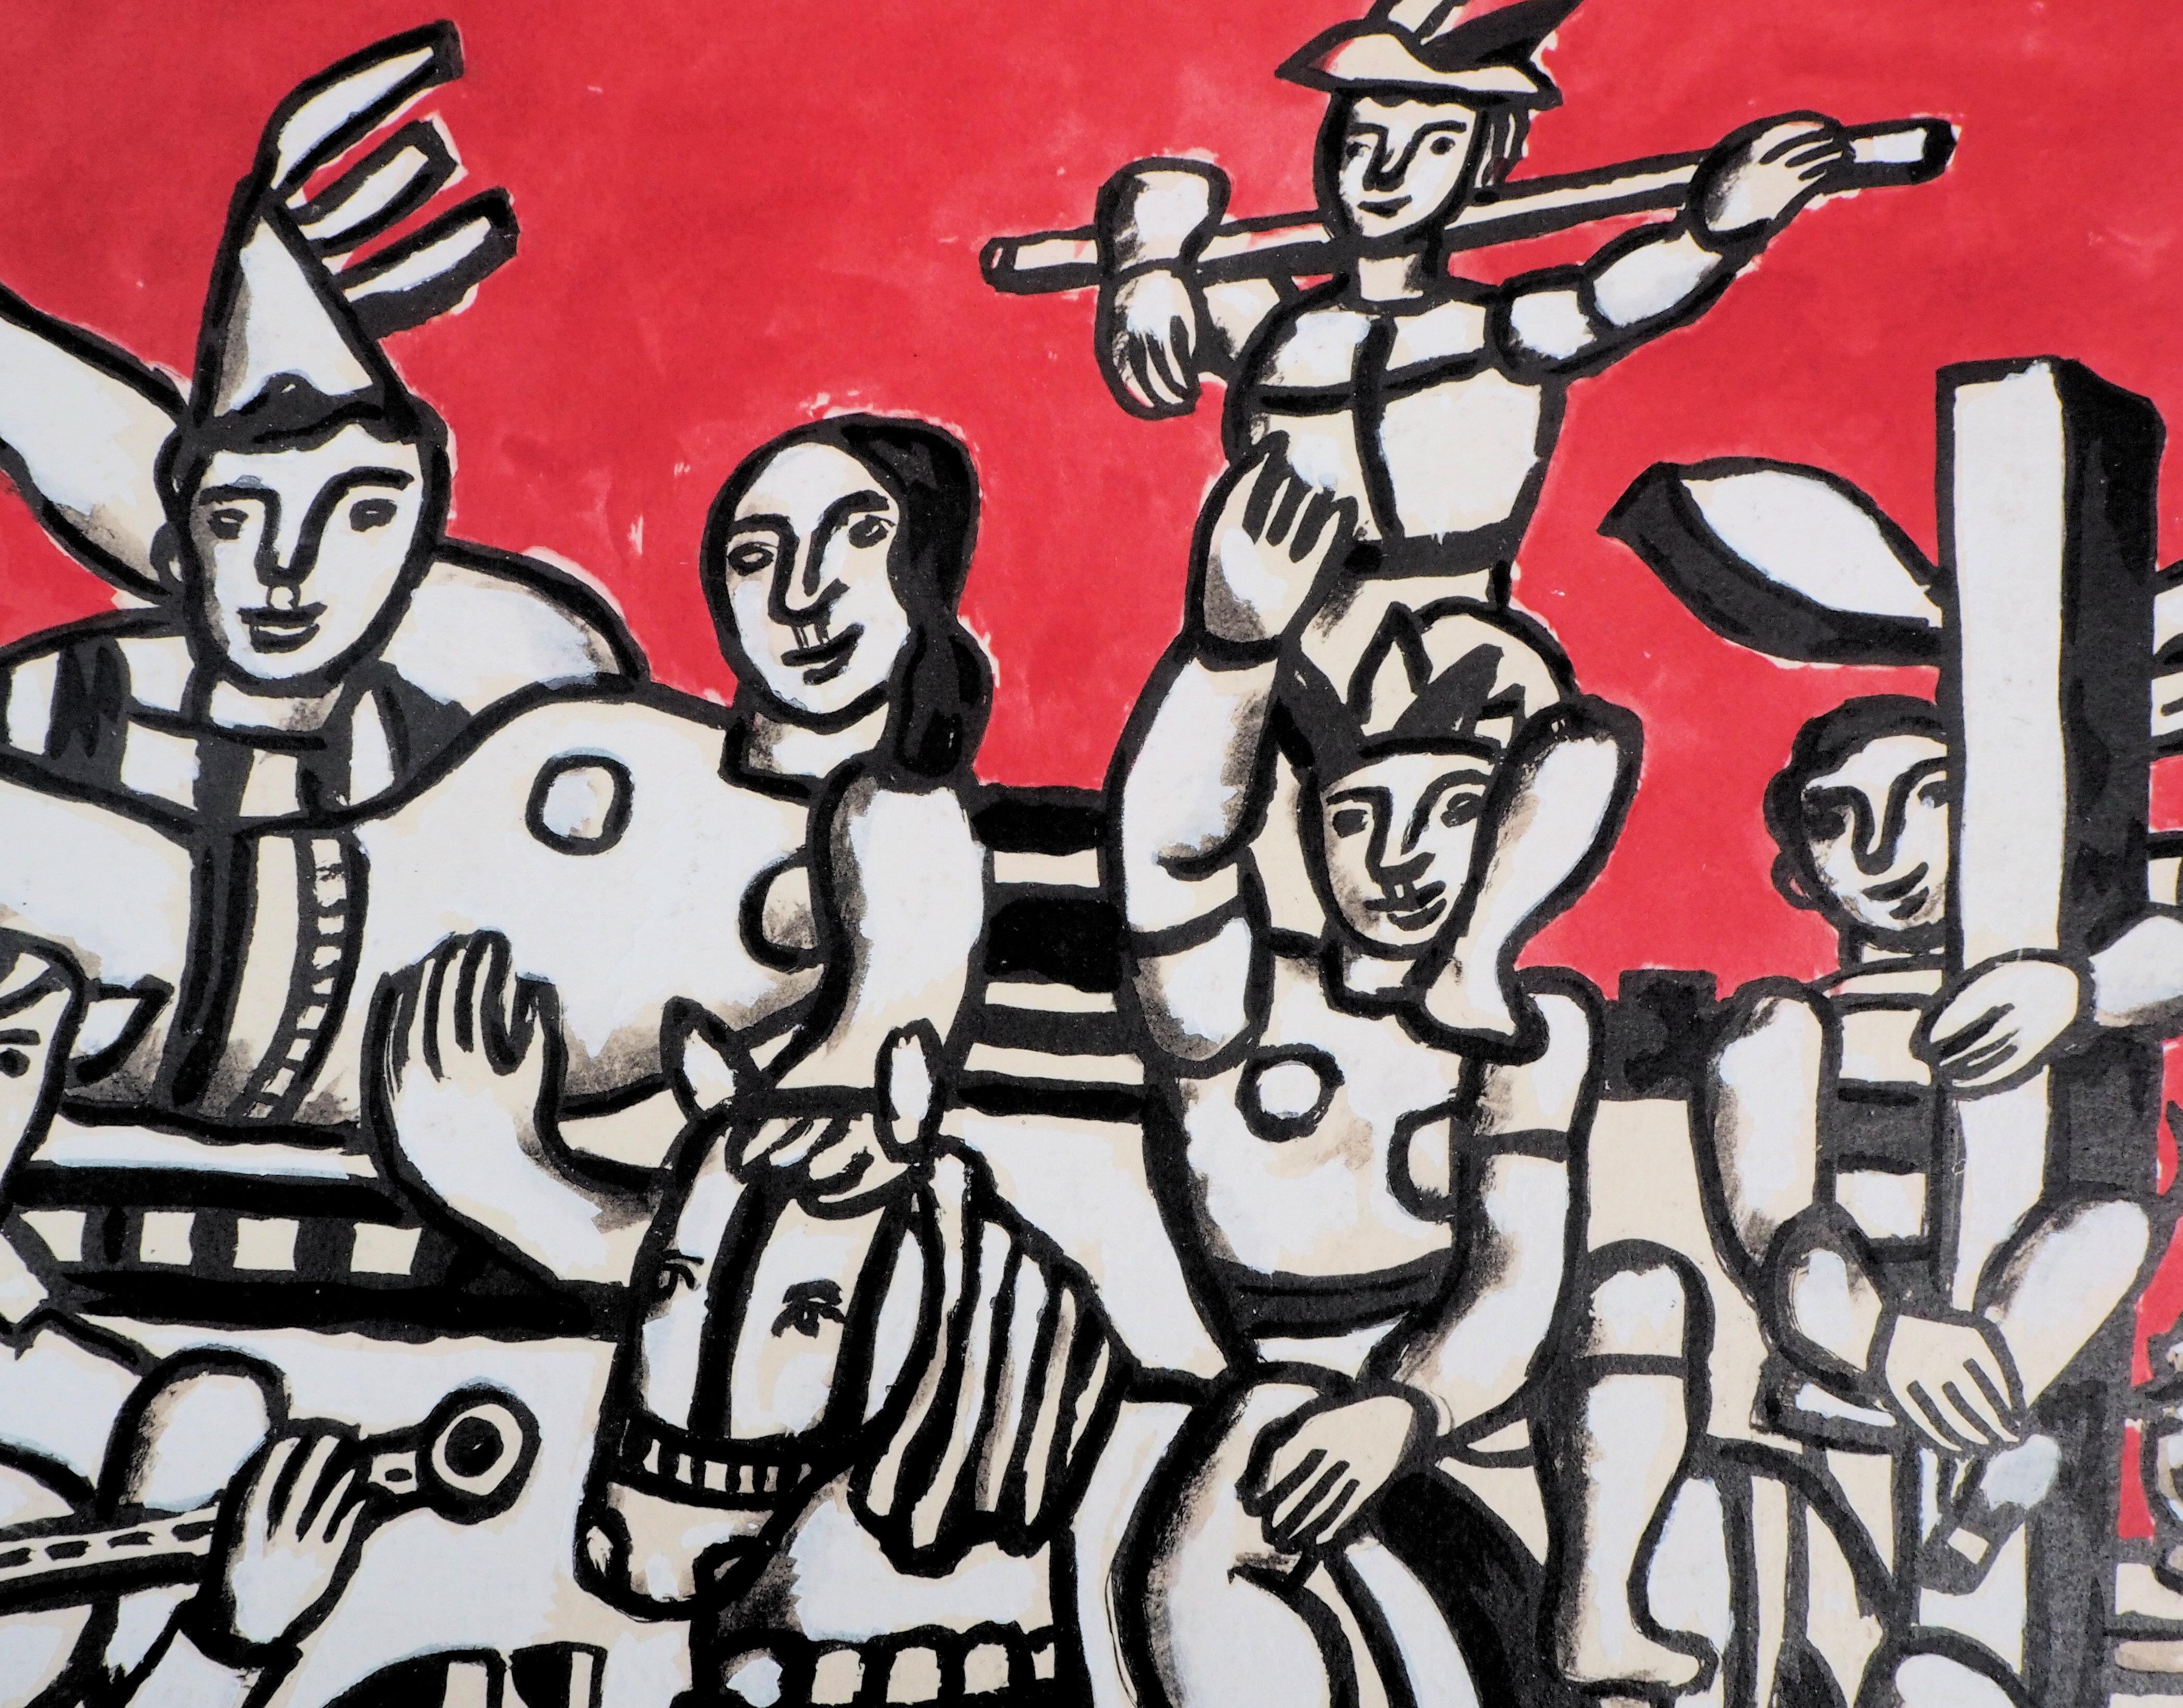 Fernand LÉGER 
Happy People : The Parade, 1959

Original lithograph and stencil 
Printed signature in the plate
On vellum Auvergne 39,5 x 50 cm (c. 15,3 x 19,6 Inches)
Published in 1959, under the control of the wife of  the artist, Nadia